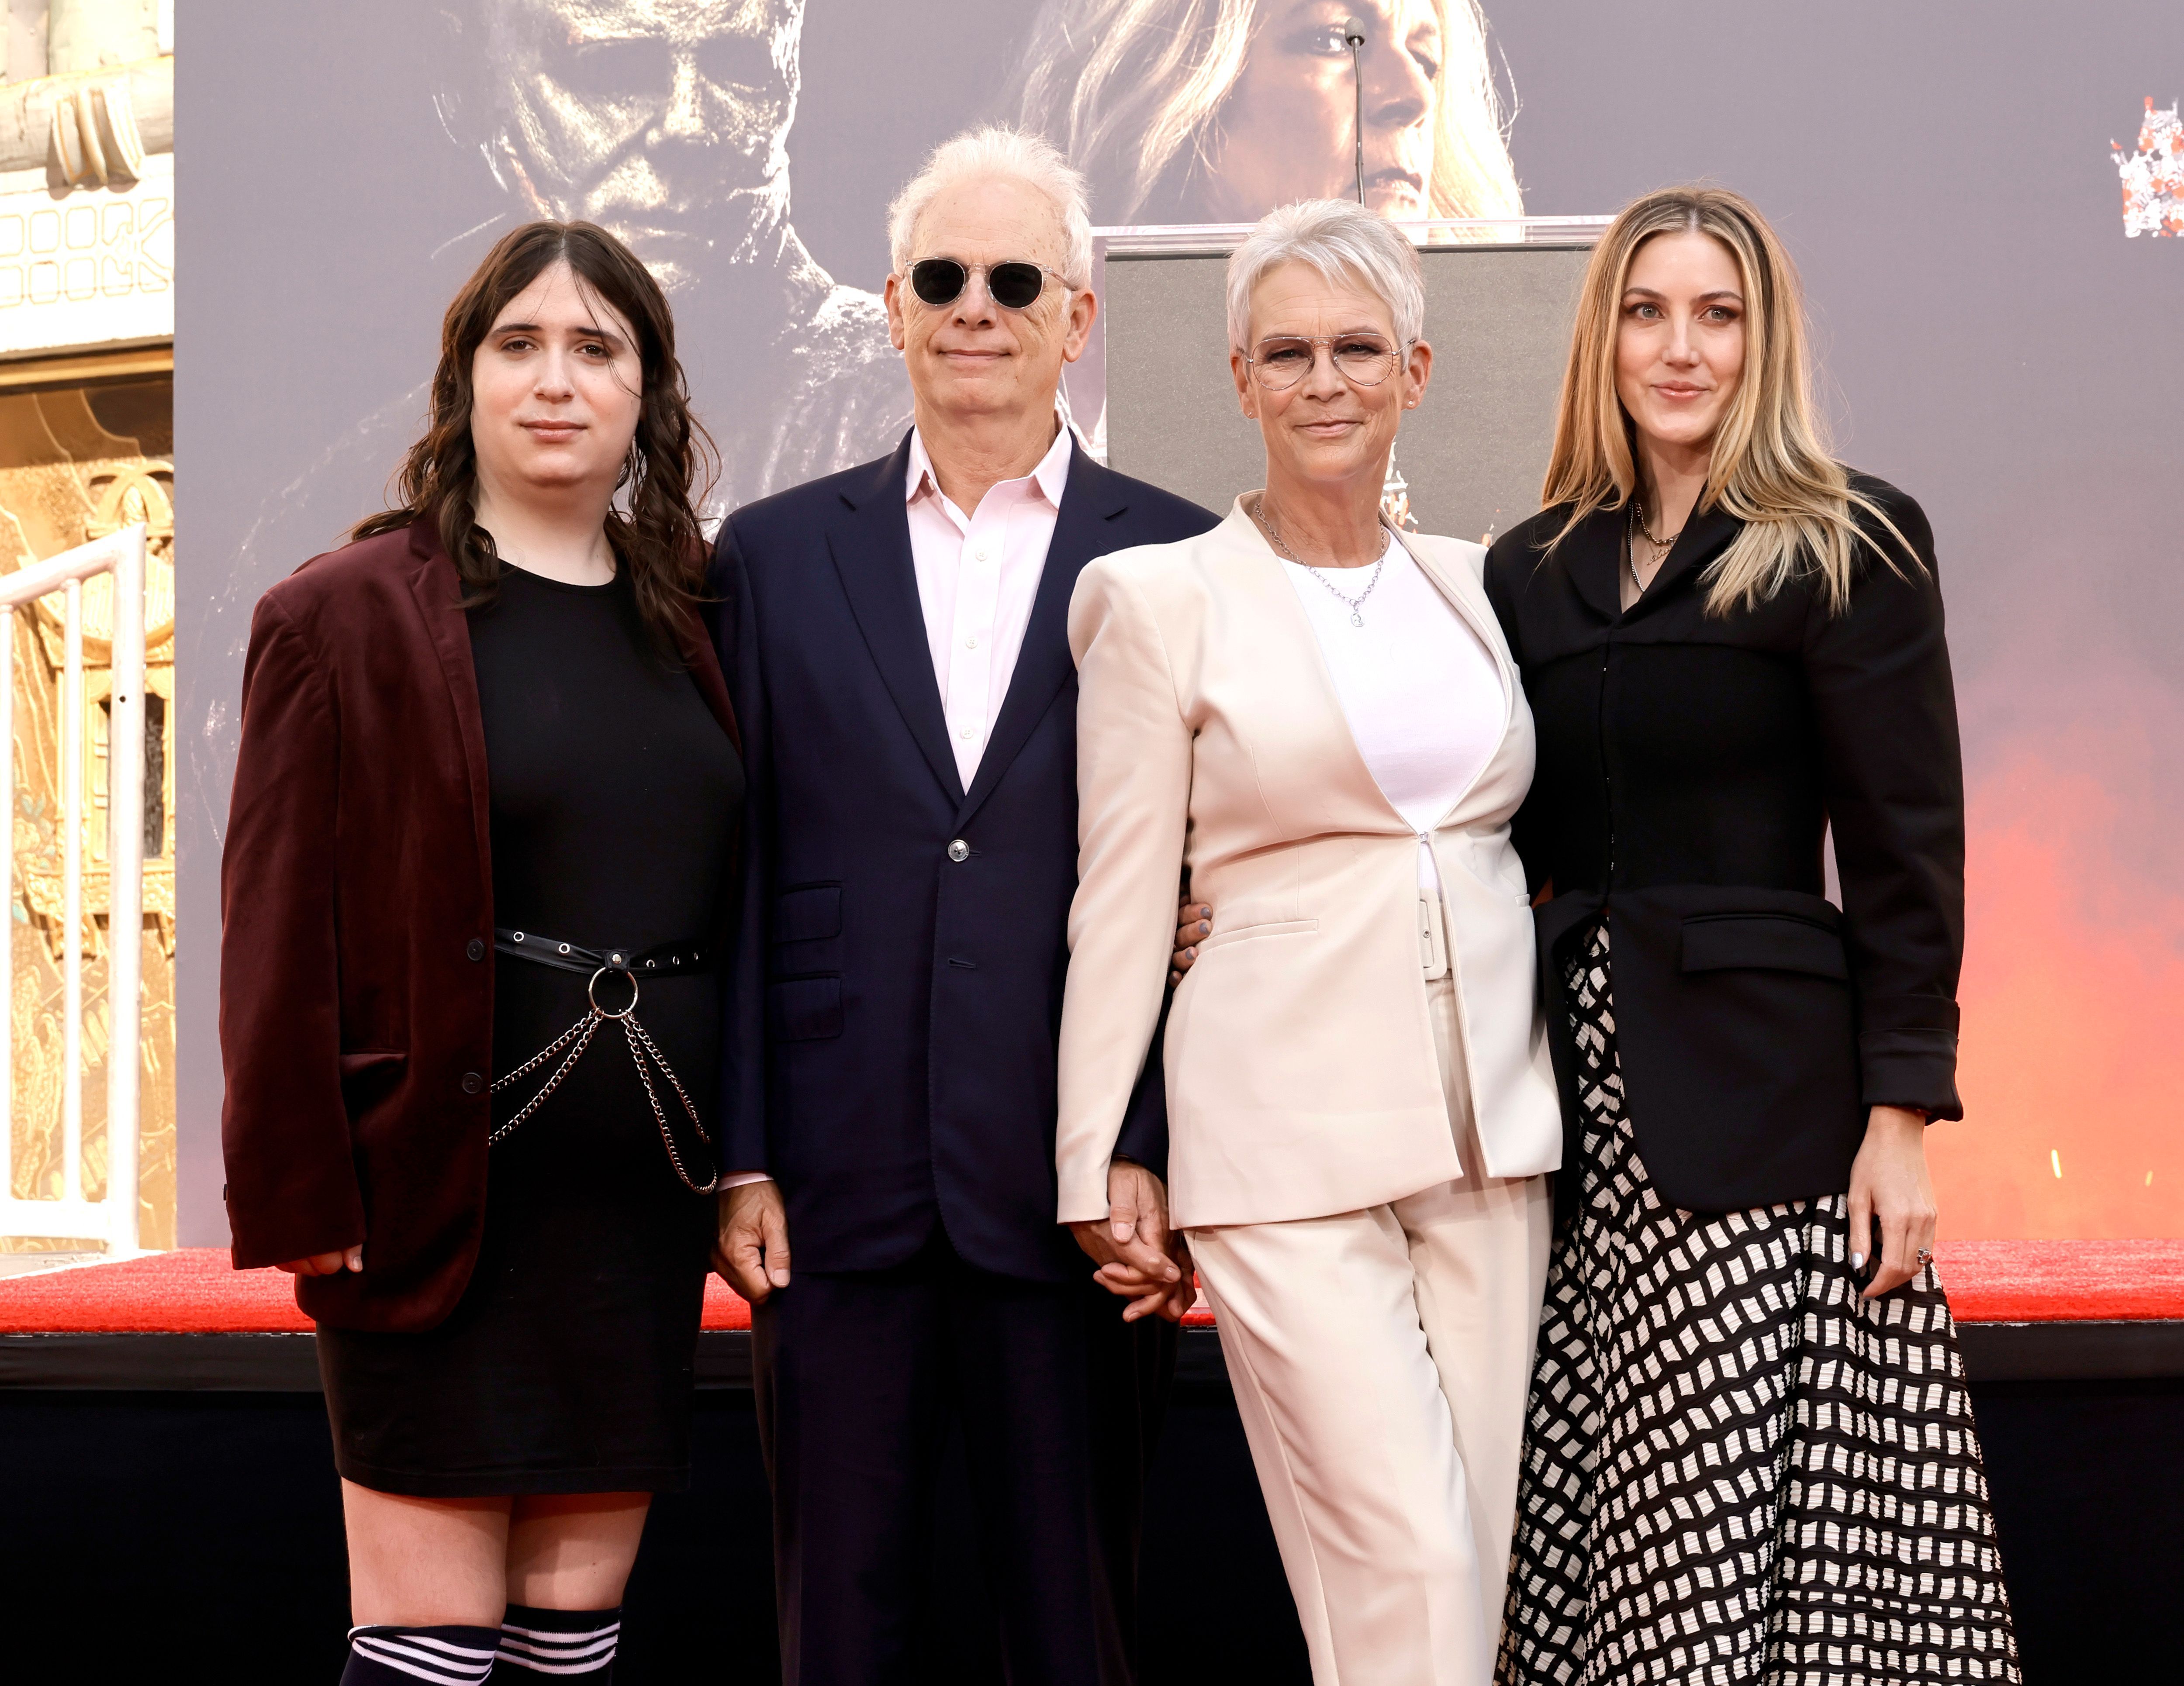 Ruby Guest, Christopher Guest, Jamie Lee Curtis, and Annie Guest attend the Jamie Lee Curtis Hand and Footprint In Cement Ceremony at TCL Chinese Theatre in Hollywood, California on October 12, 2022. | Source: Getty Images